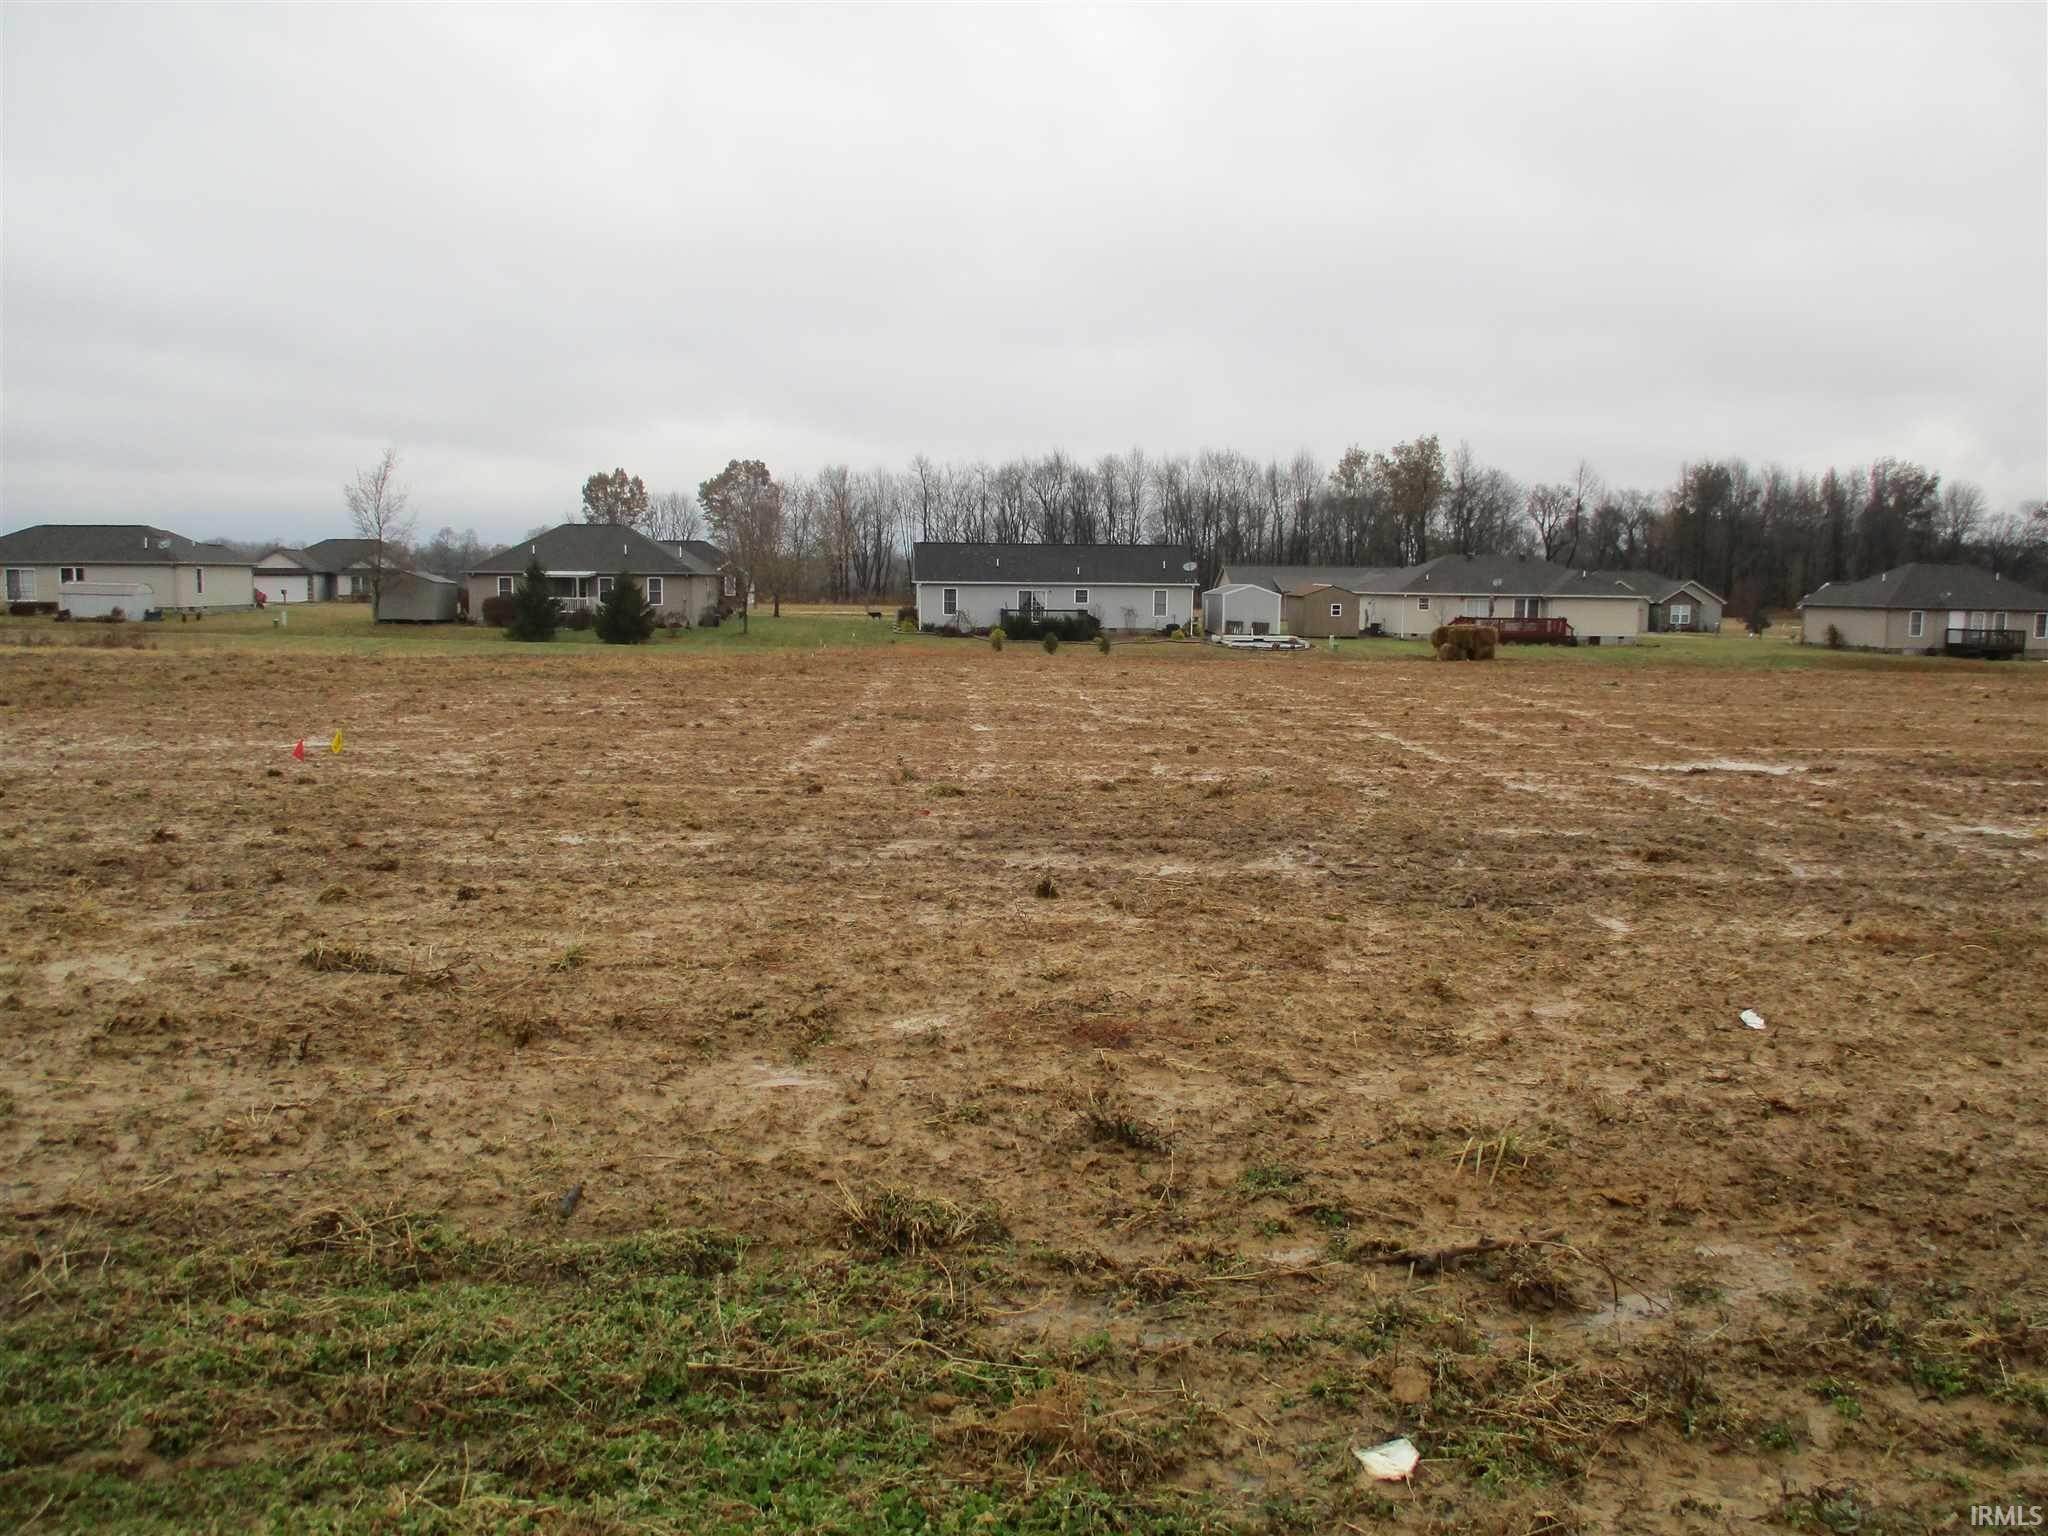 Residential Lots & Land for Sale at 833 Washington Street Rockport, Indiana 47635 United States